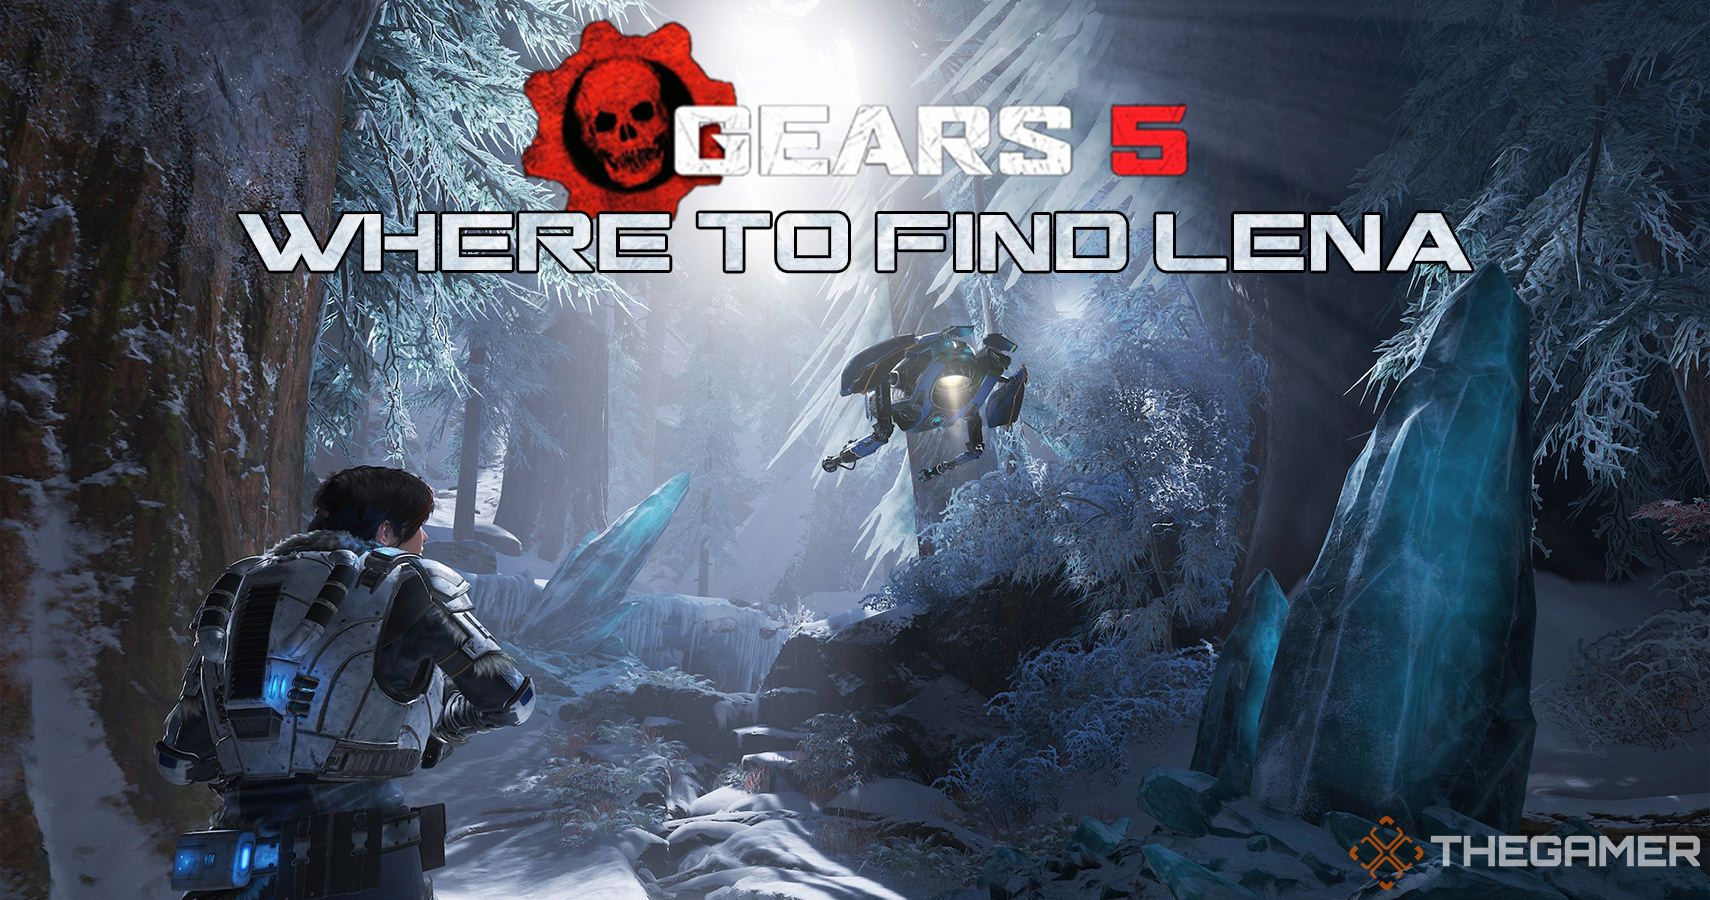 Gears 5: Where To Find Lena